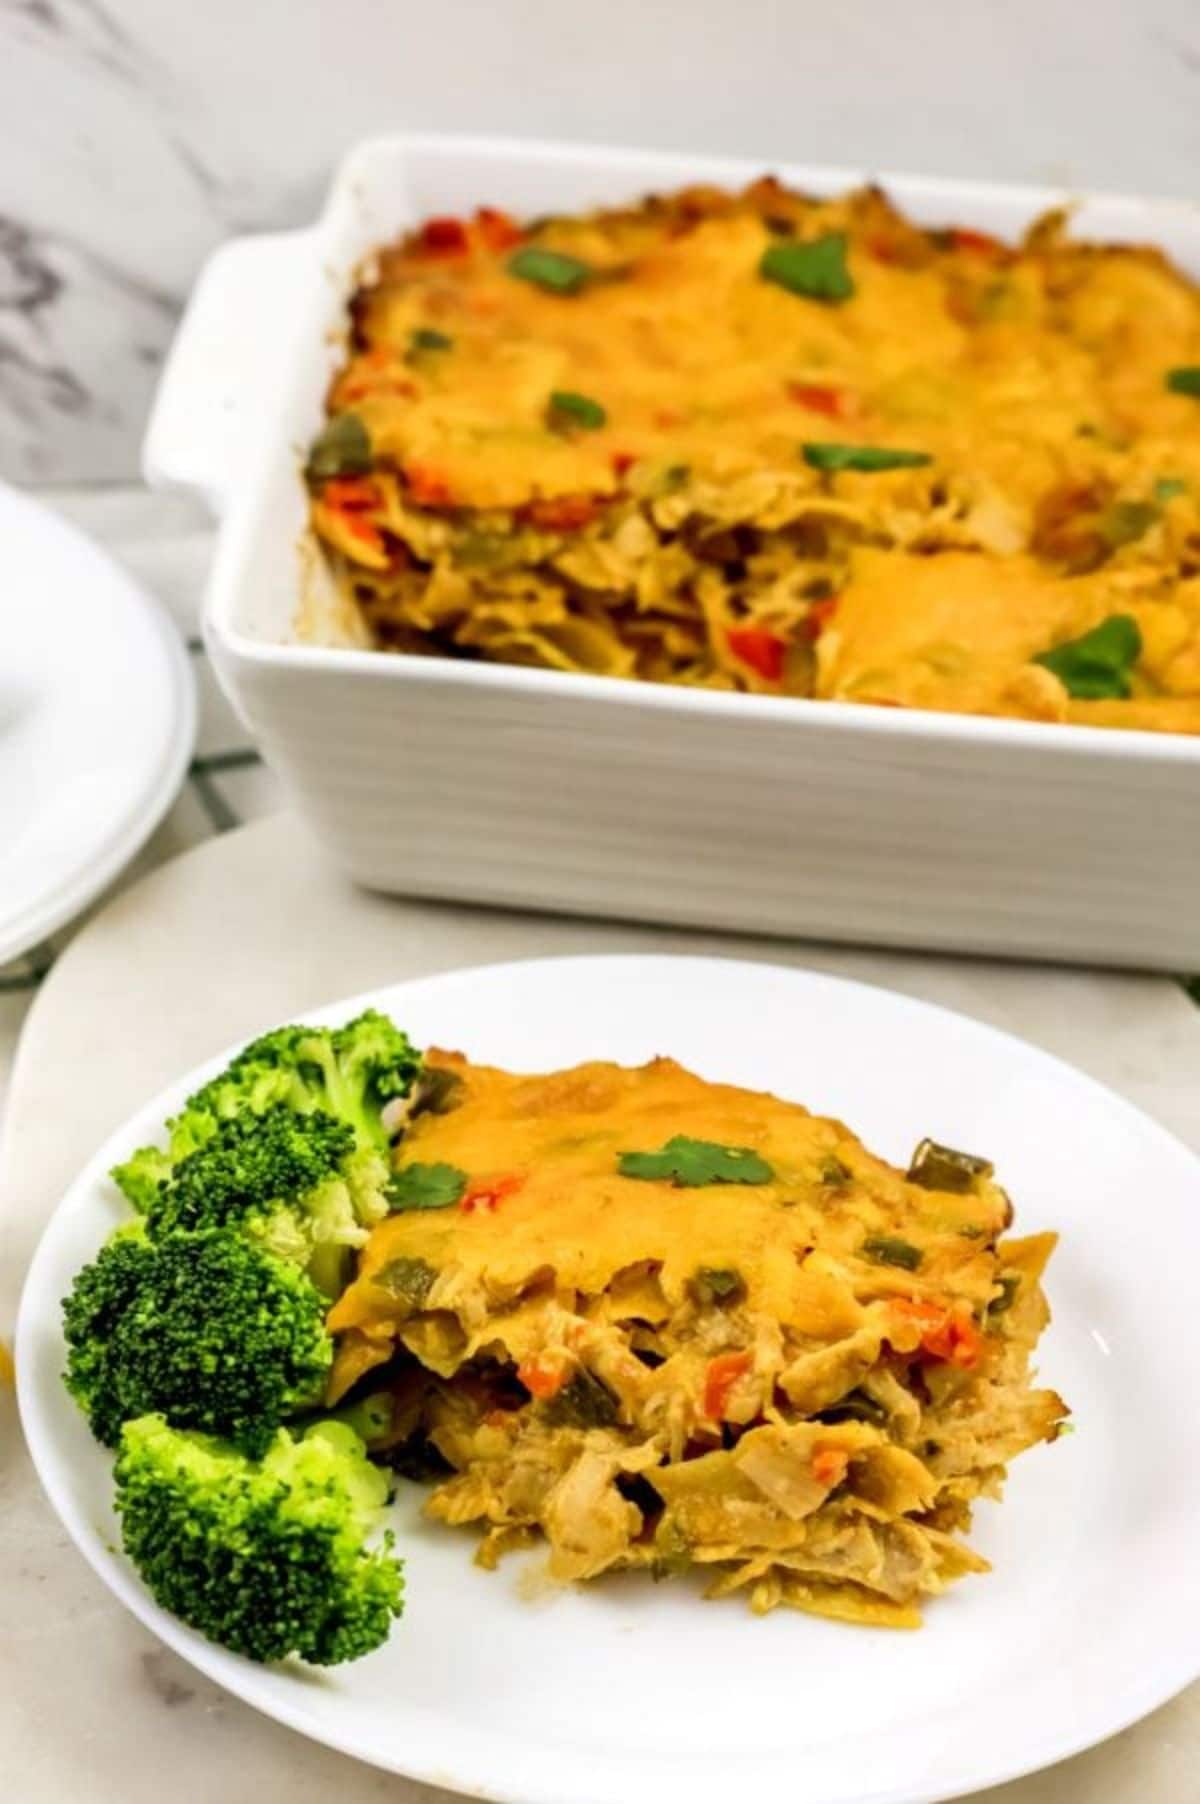 casserole and broccoli on white plate by baking dish